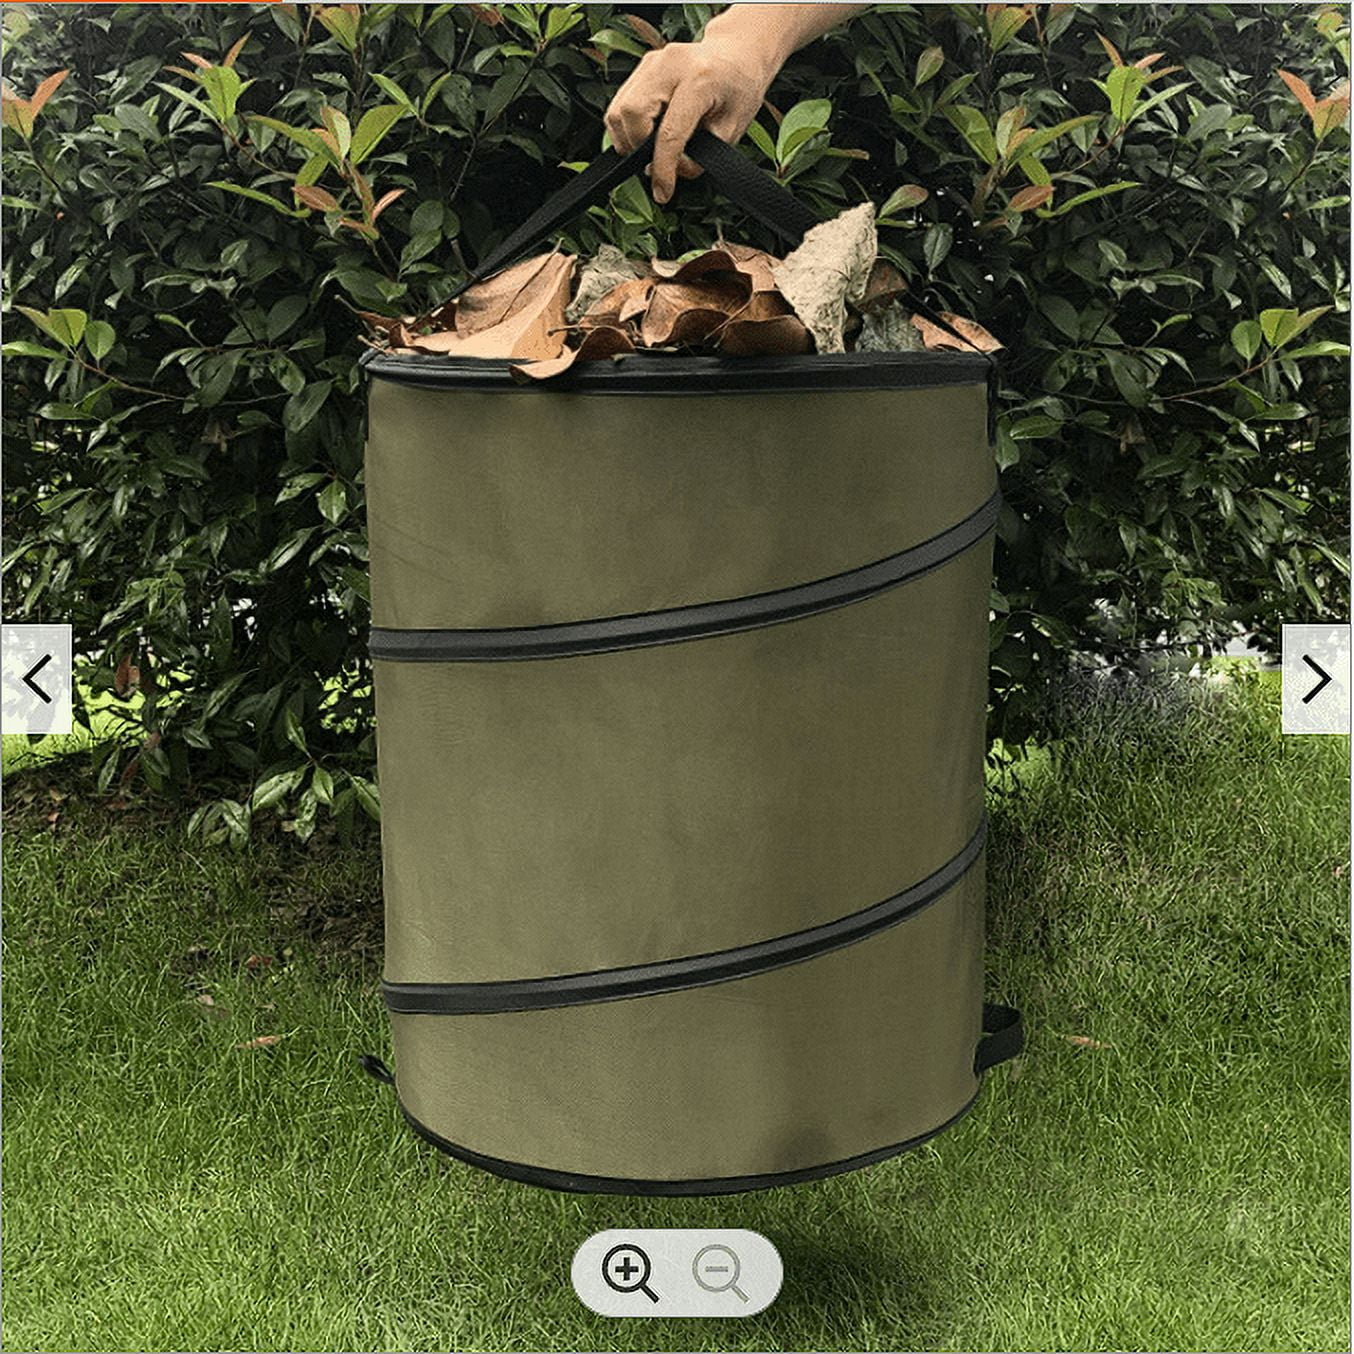 Sprinia 2-Pack 30 Gallon Collapsible Pop-Up Trash Can for Camping, RV -  Waste Yard Bag for Gardening Lawn/Leaf - 30 Gallon Each Bag, Green